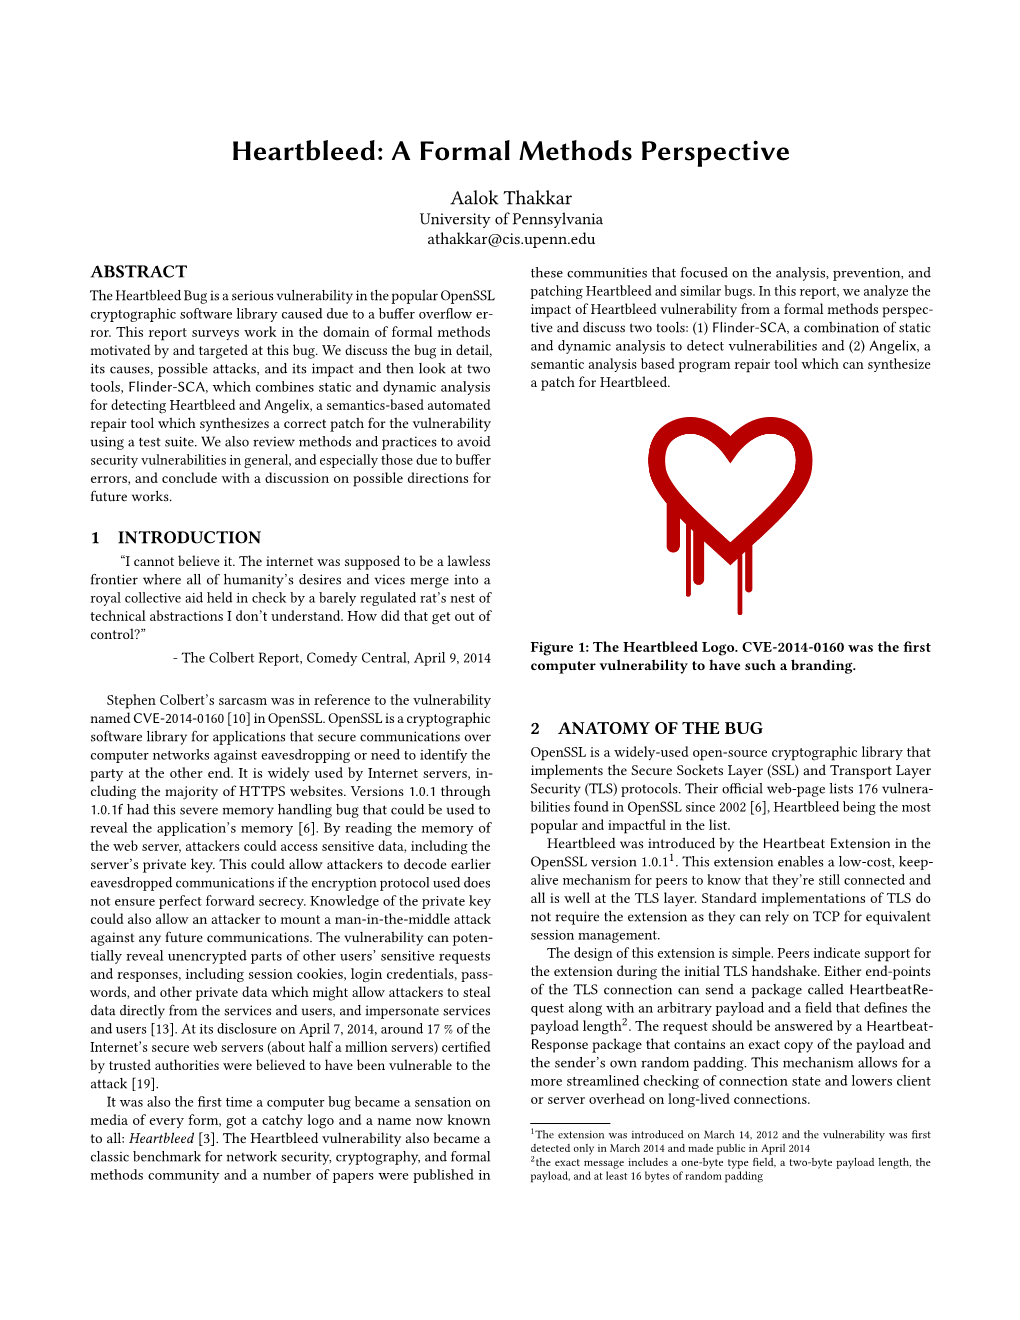 Heartbleed: a Formal Methods Perspective